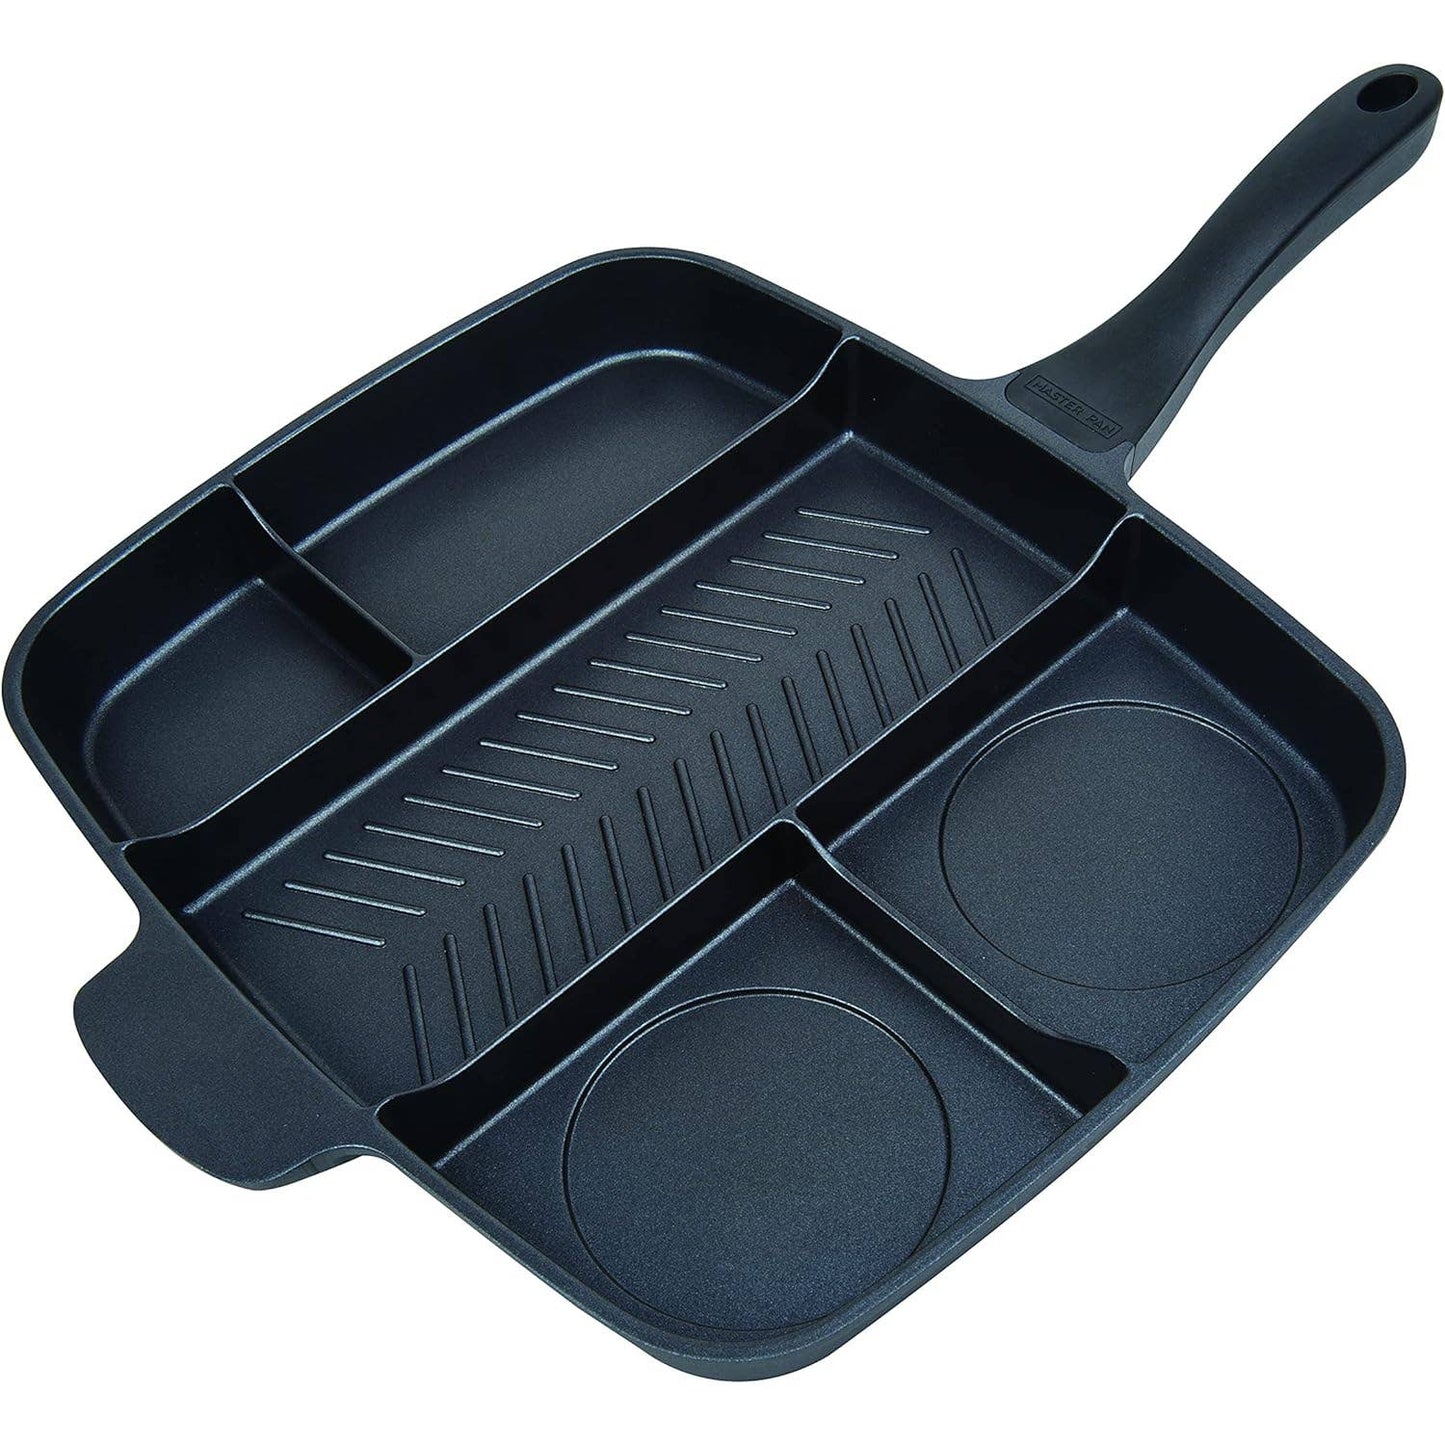 A KITCHEN MUST HAVE! MasterPan NonStick Divided Grill/Fry/Oven Skillet